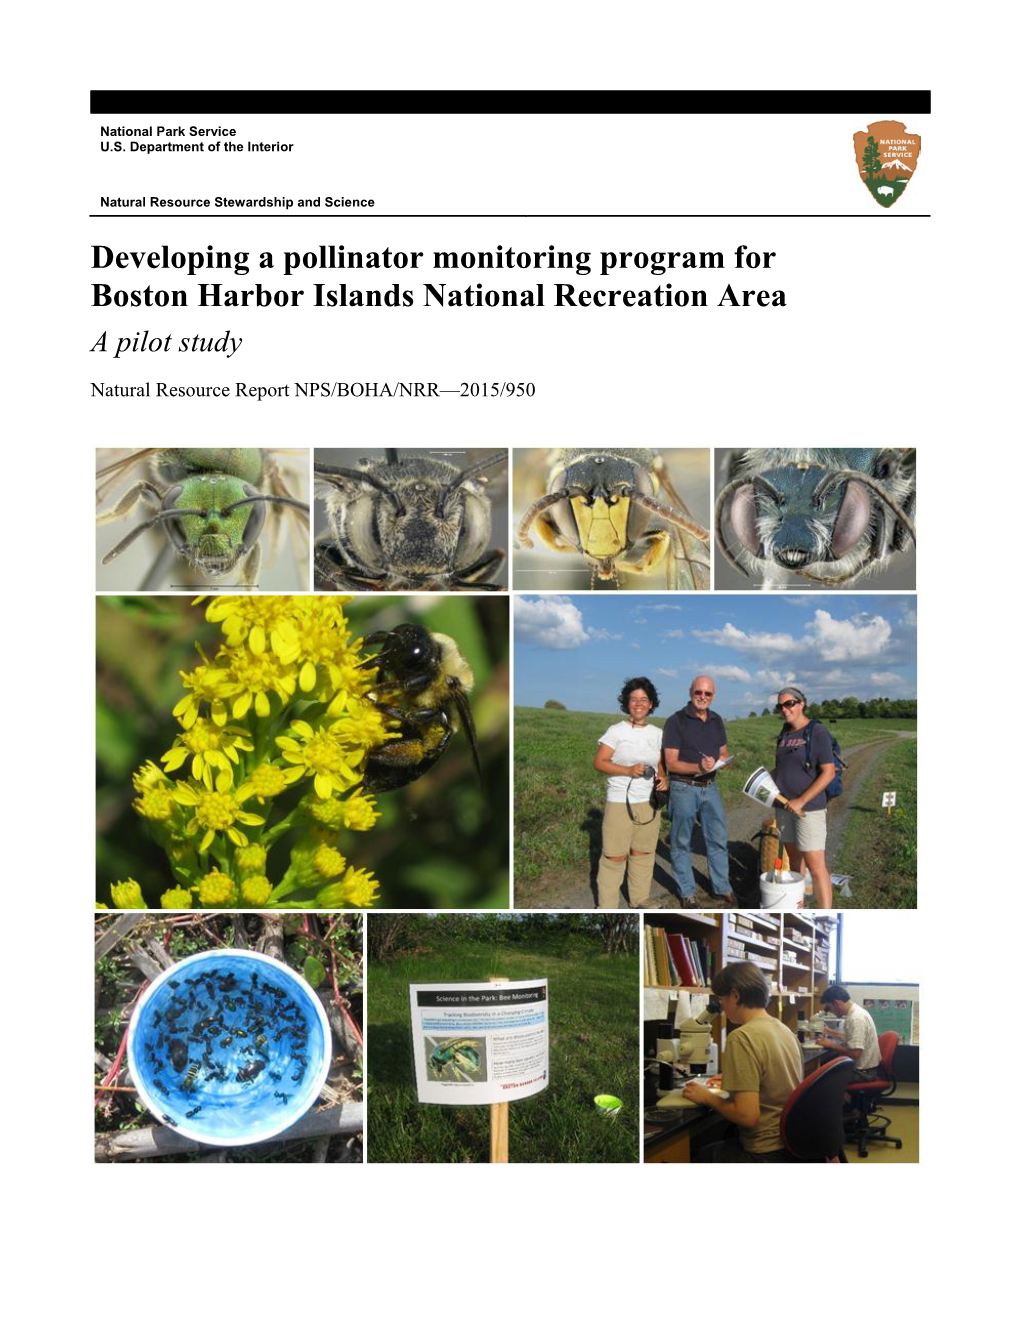 Developing a Pollinator Monitoring Program for Boston Harbor Islands National Recreation Area a Pilot Study